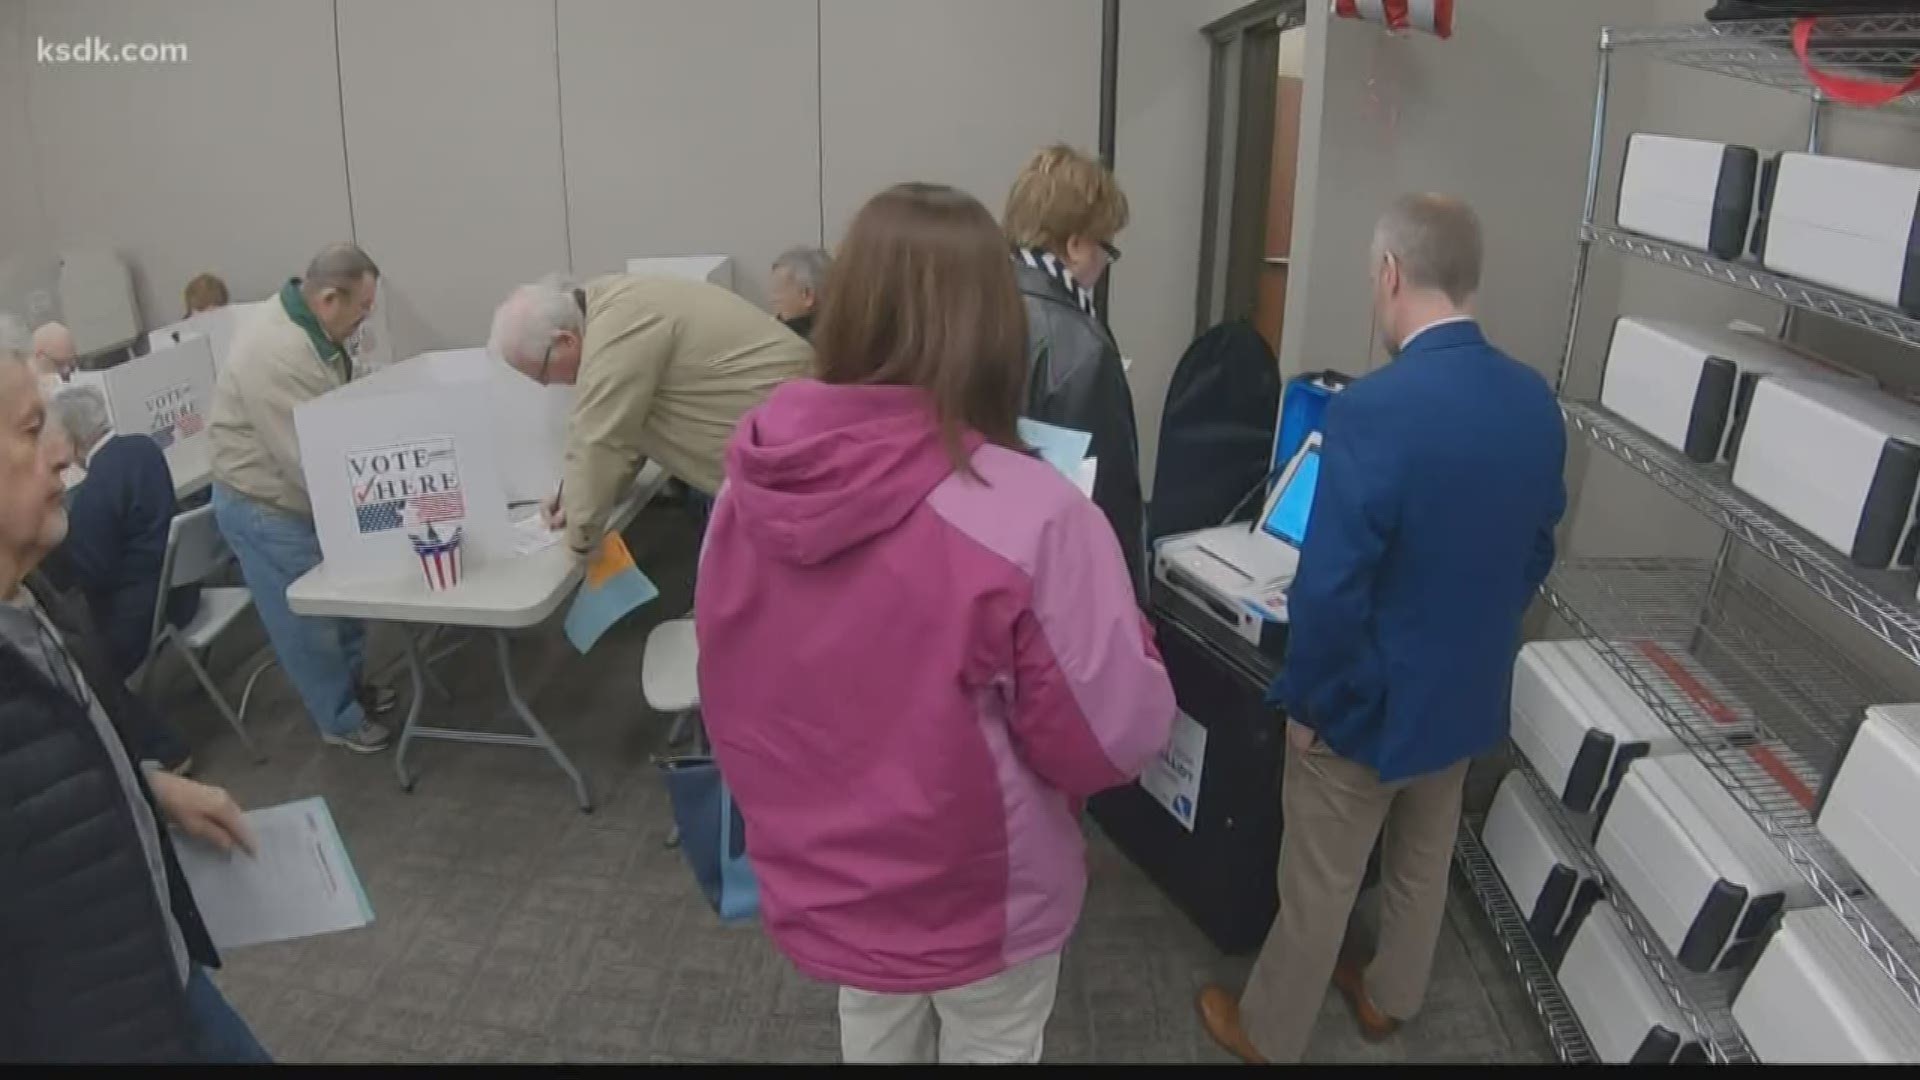 The county admits there could be some lines - especially in a presidential election - as each ballot is printed.